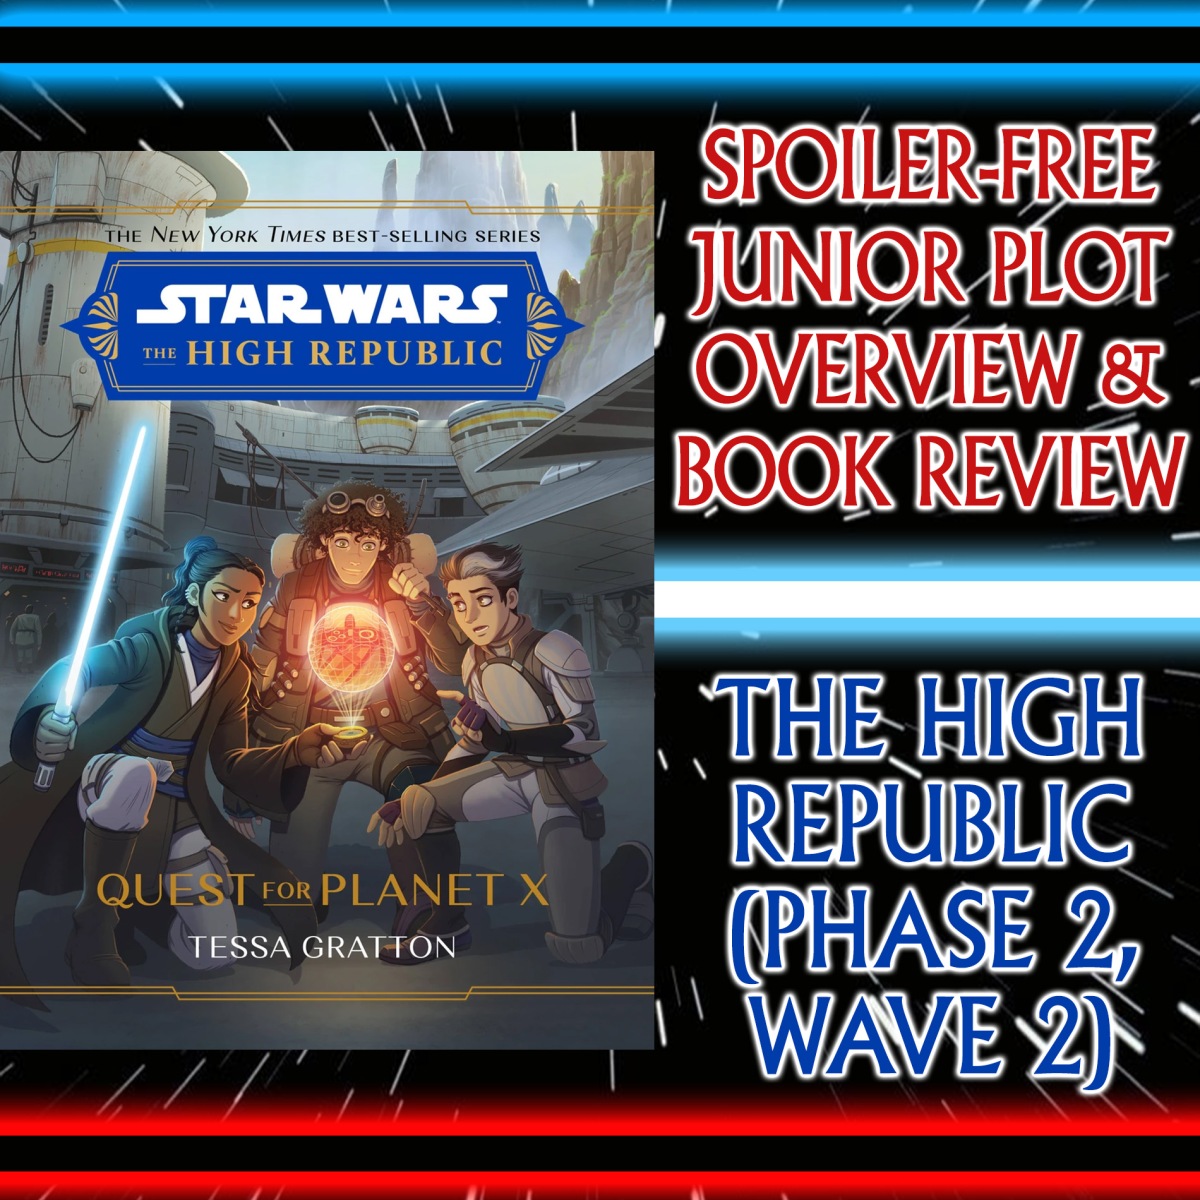 Star Wars: Comics In Canon – Quest For Planet X by Tessa Gratton – Book Review & Plot Summary/Overview: Hyperspace Chase, Rooper Nitani, Dass Leffbruk, Sky Graf & The Path Of The Open Hand – The High Republic Phase 2